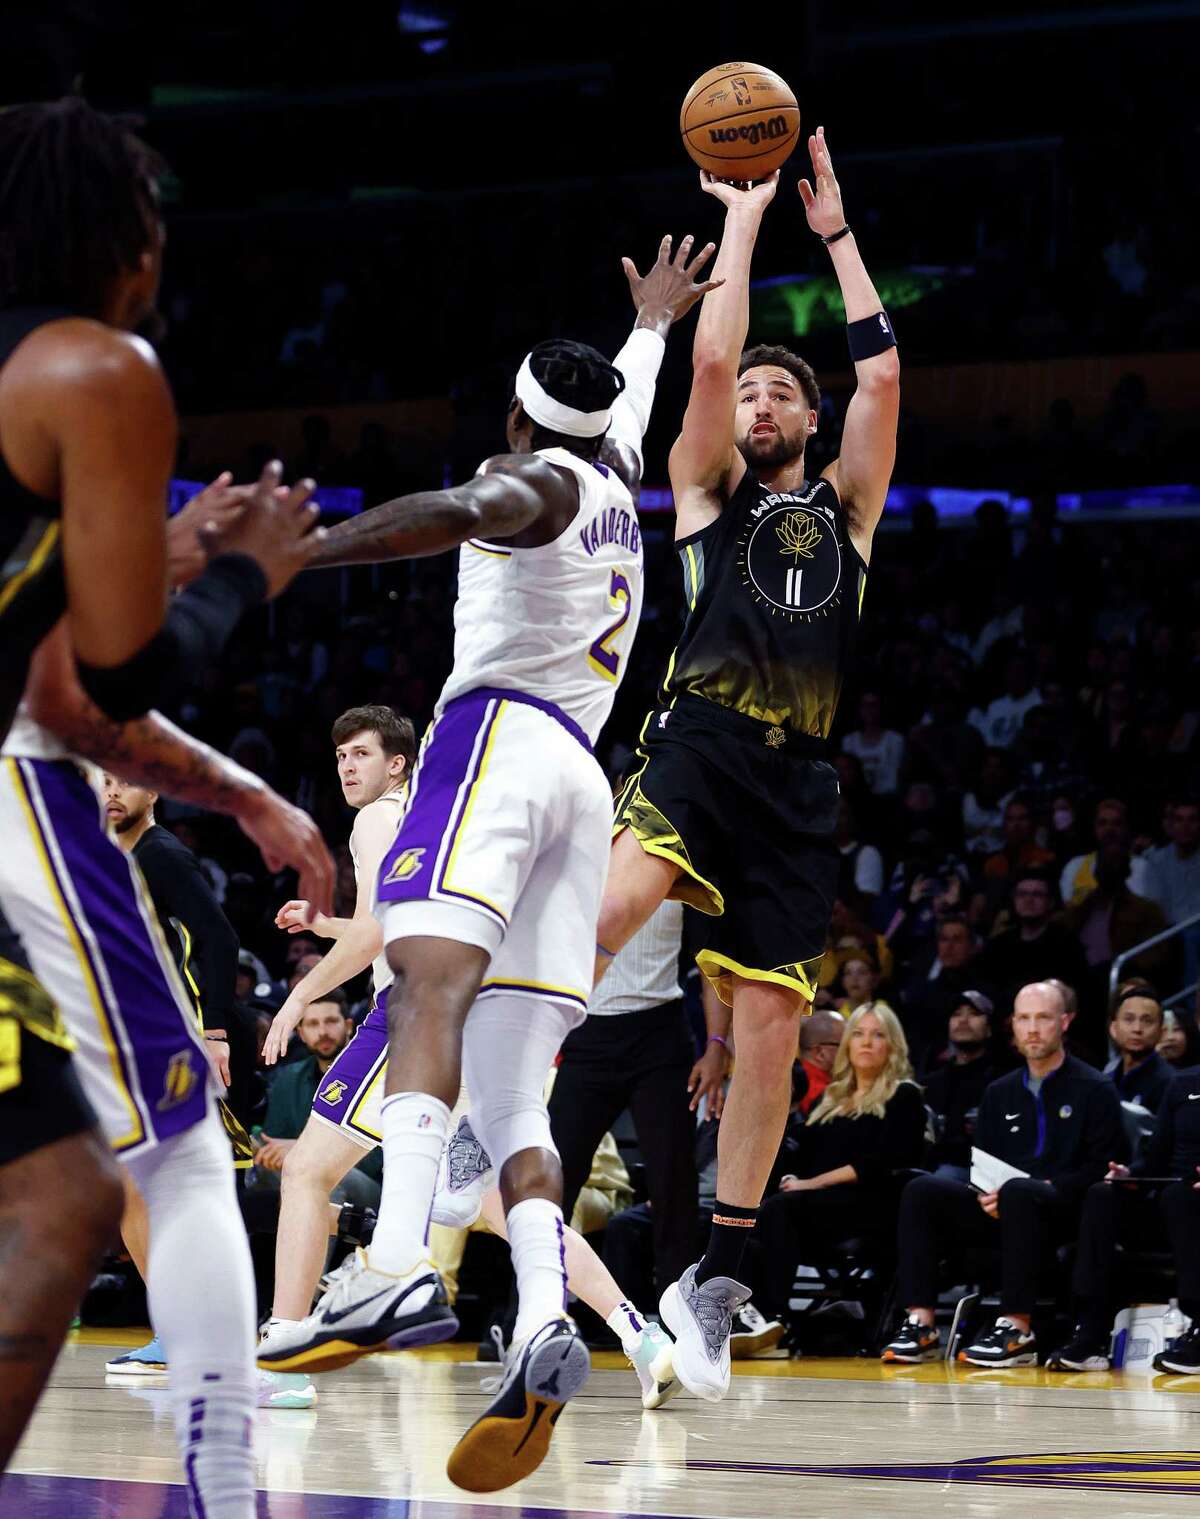 Klay Thompson, who had 22 points, launches a shot against Jarred Vanderbilt on Sunday in Los Angeles.